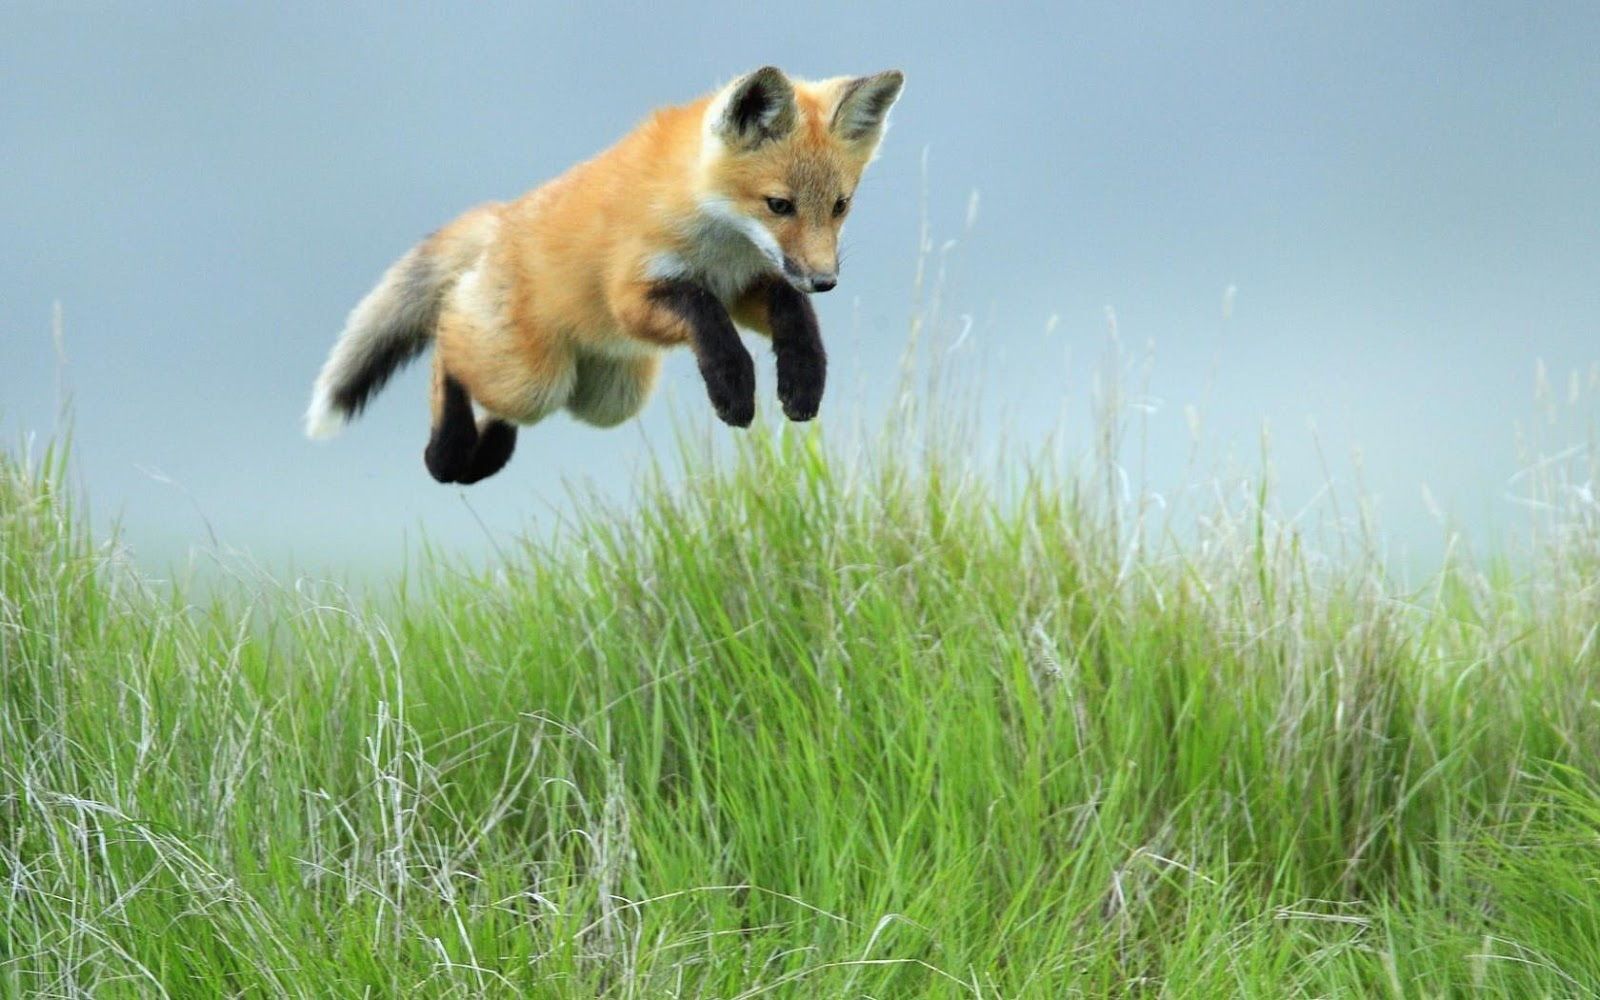 HD animal wallpaper a jumping fox in the high grass HD foxe animal 1867 - Fox Animal HD Wallpaper